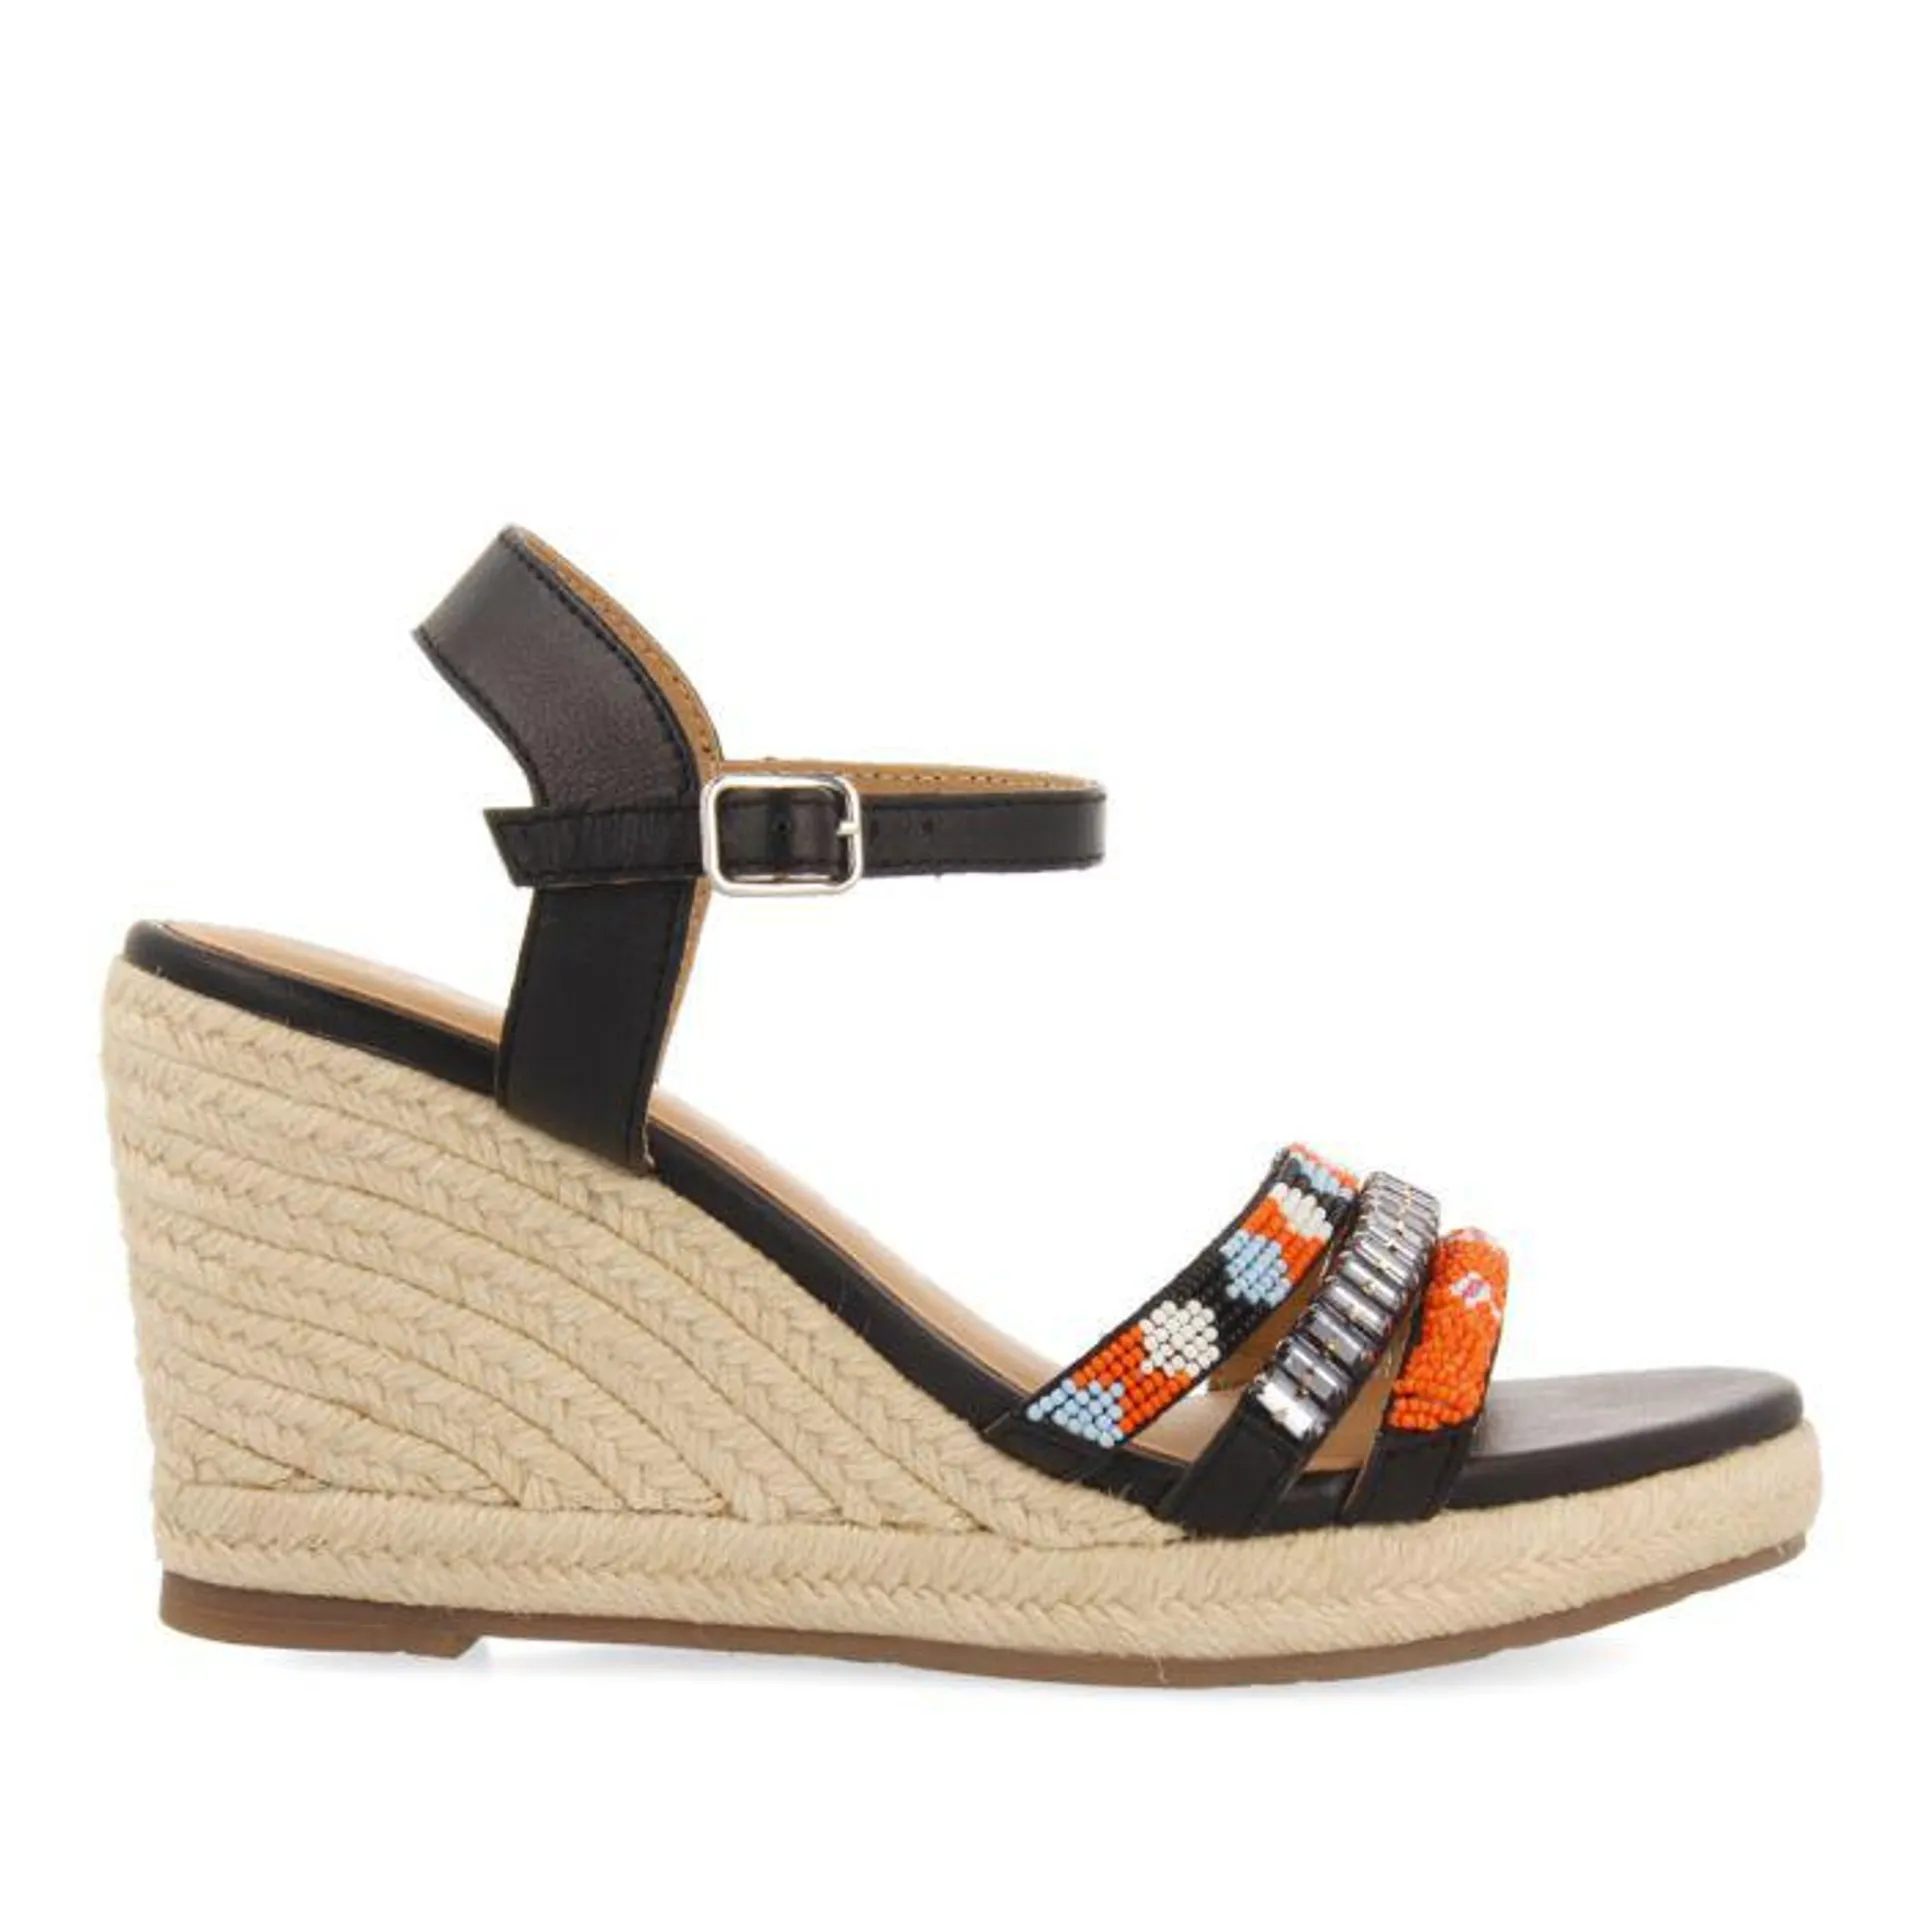 Bacoor women's multicoloured sandals with decorative tassels and jute wedges